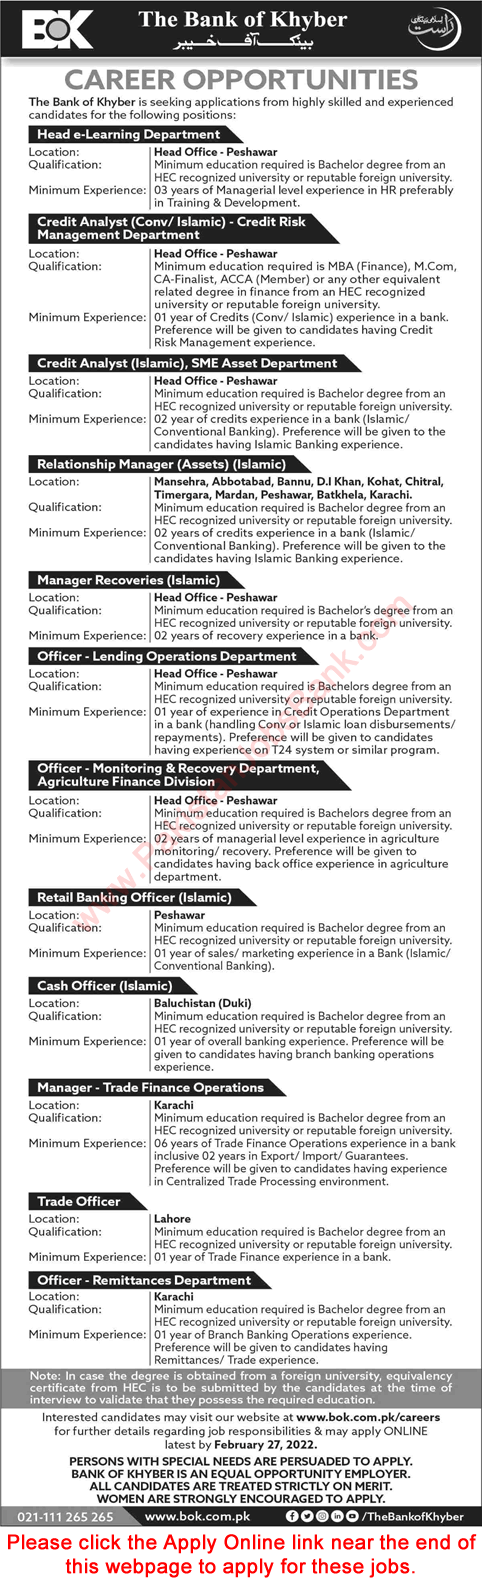 Bank of Khyber Jobs February 2022 Apply Online Relationship Managers, Cash Officers & Others Latest